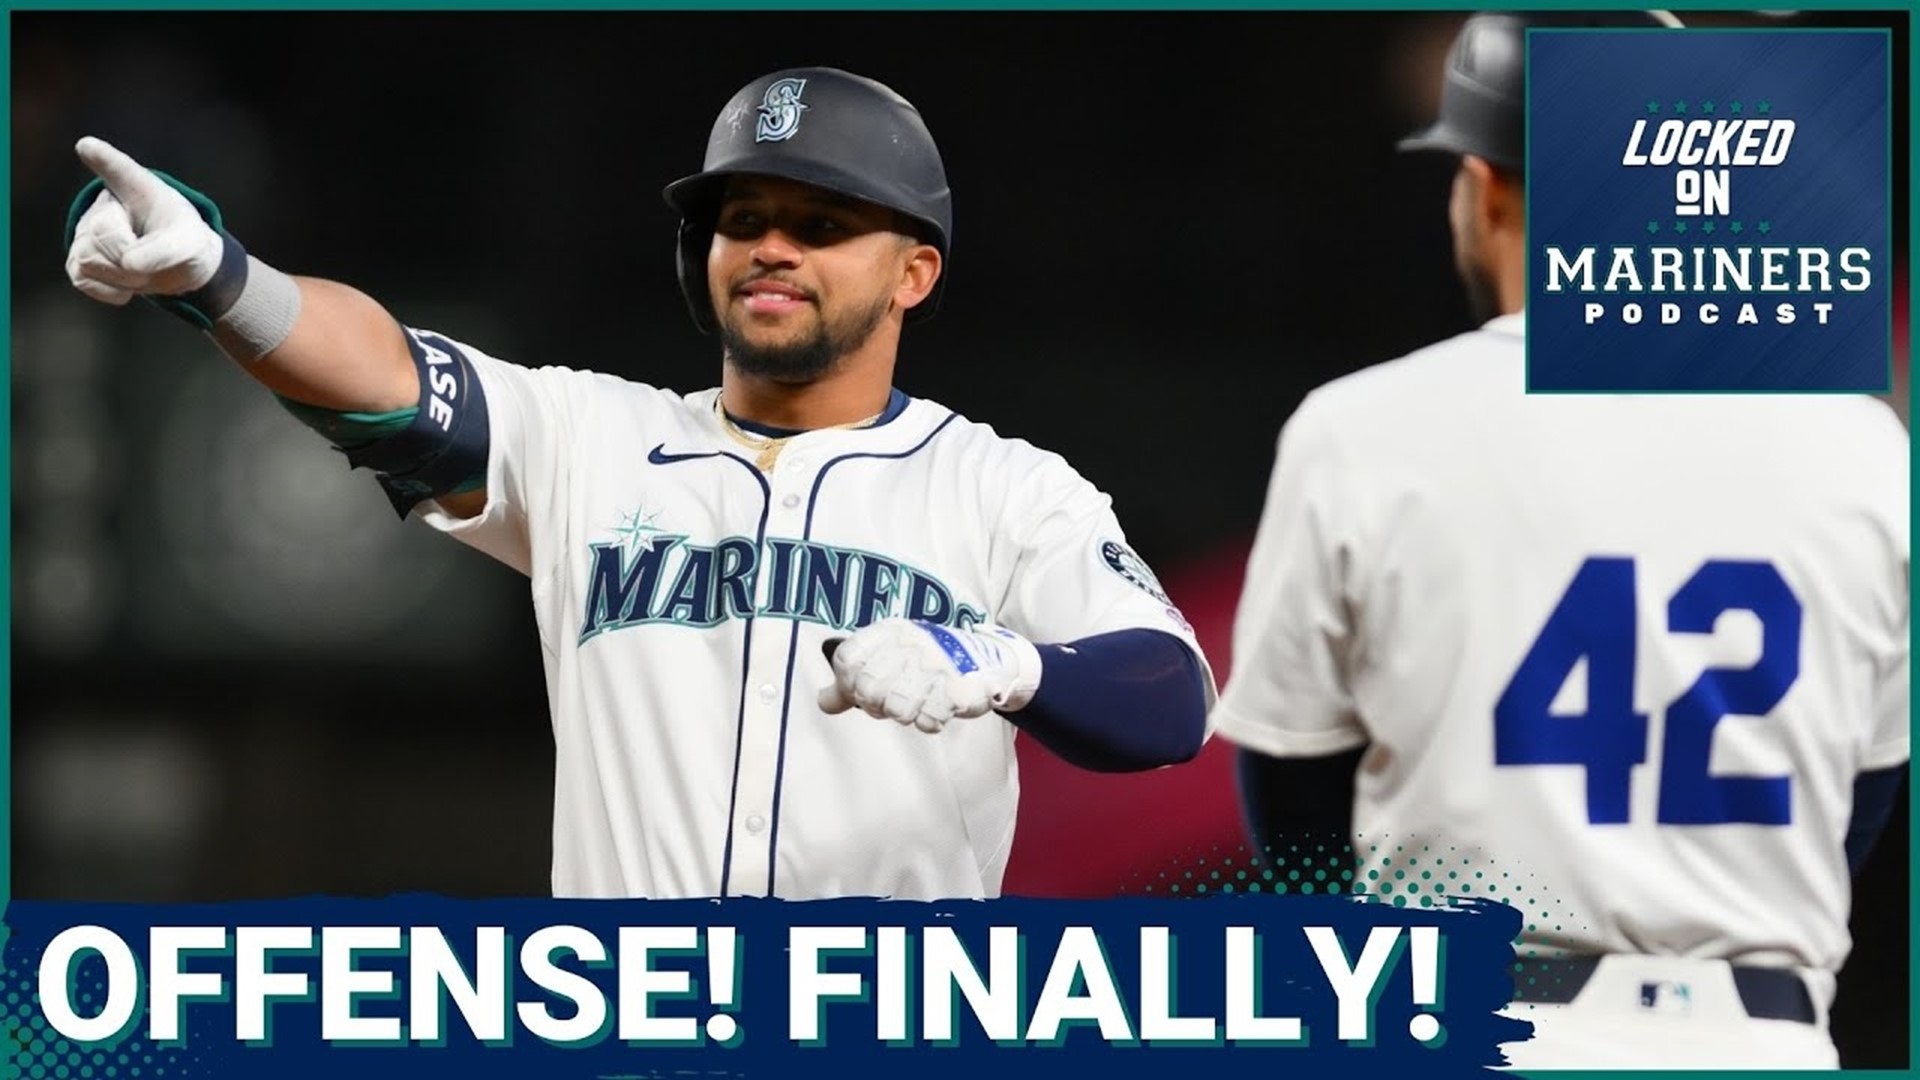 The Mariners finally broke out and played a complete game on Monday night, routing the Reds to the tune of a 9-3 final.